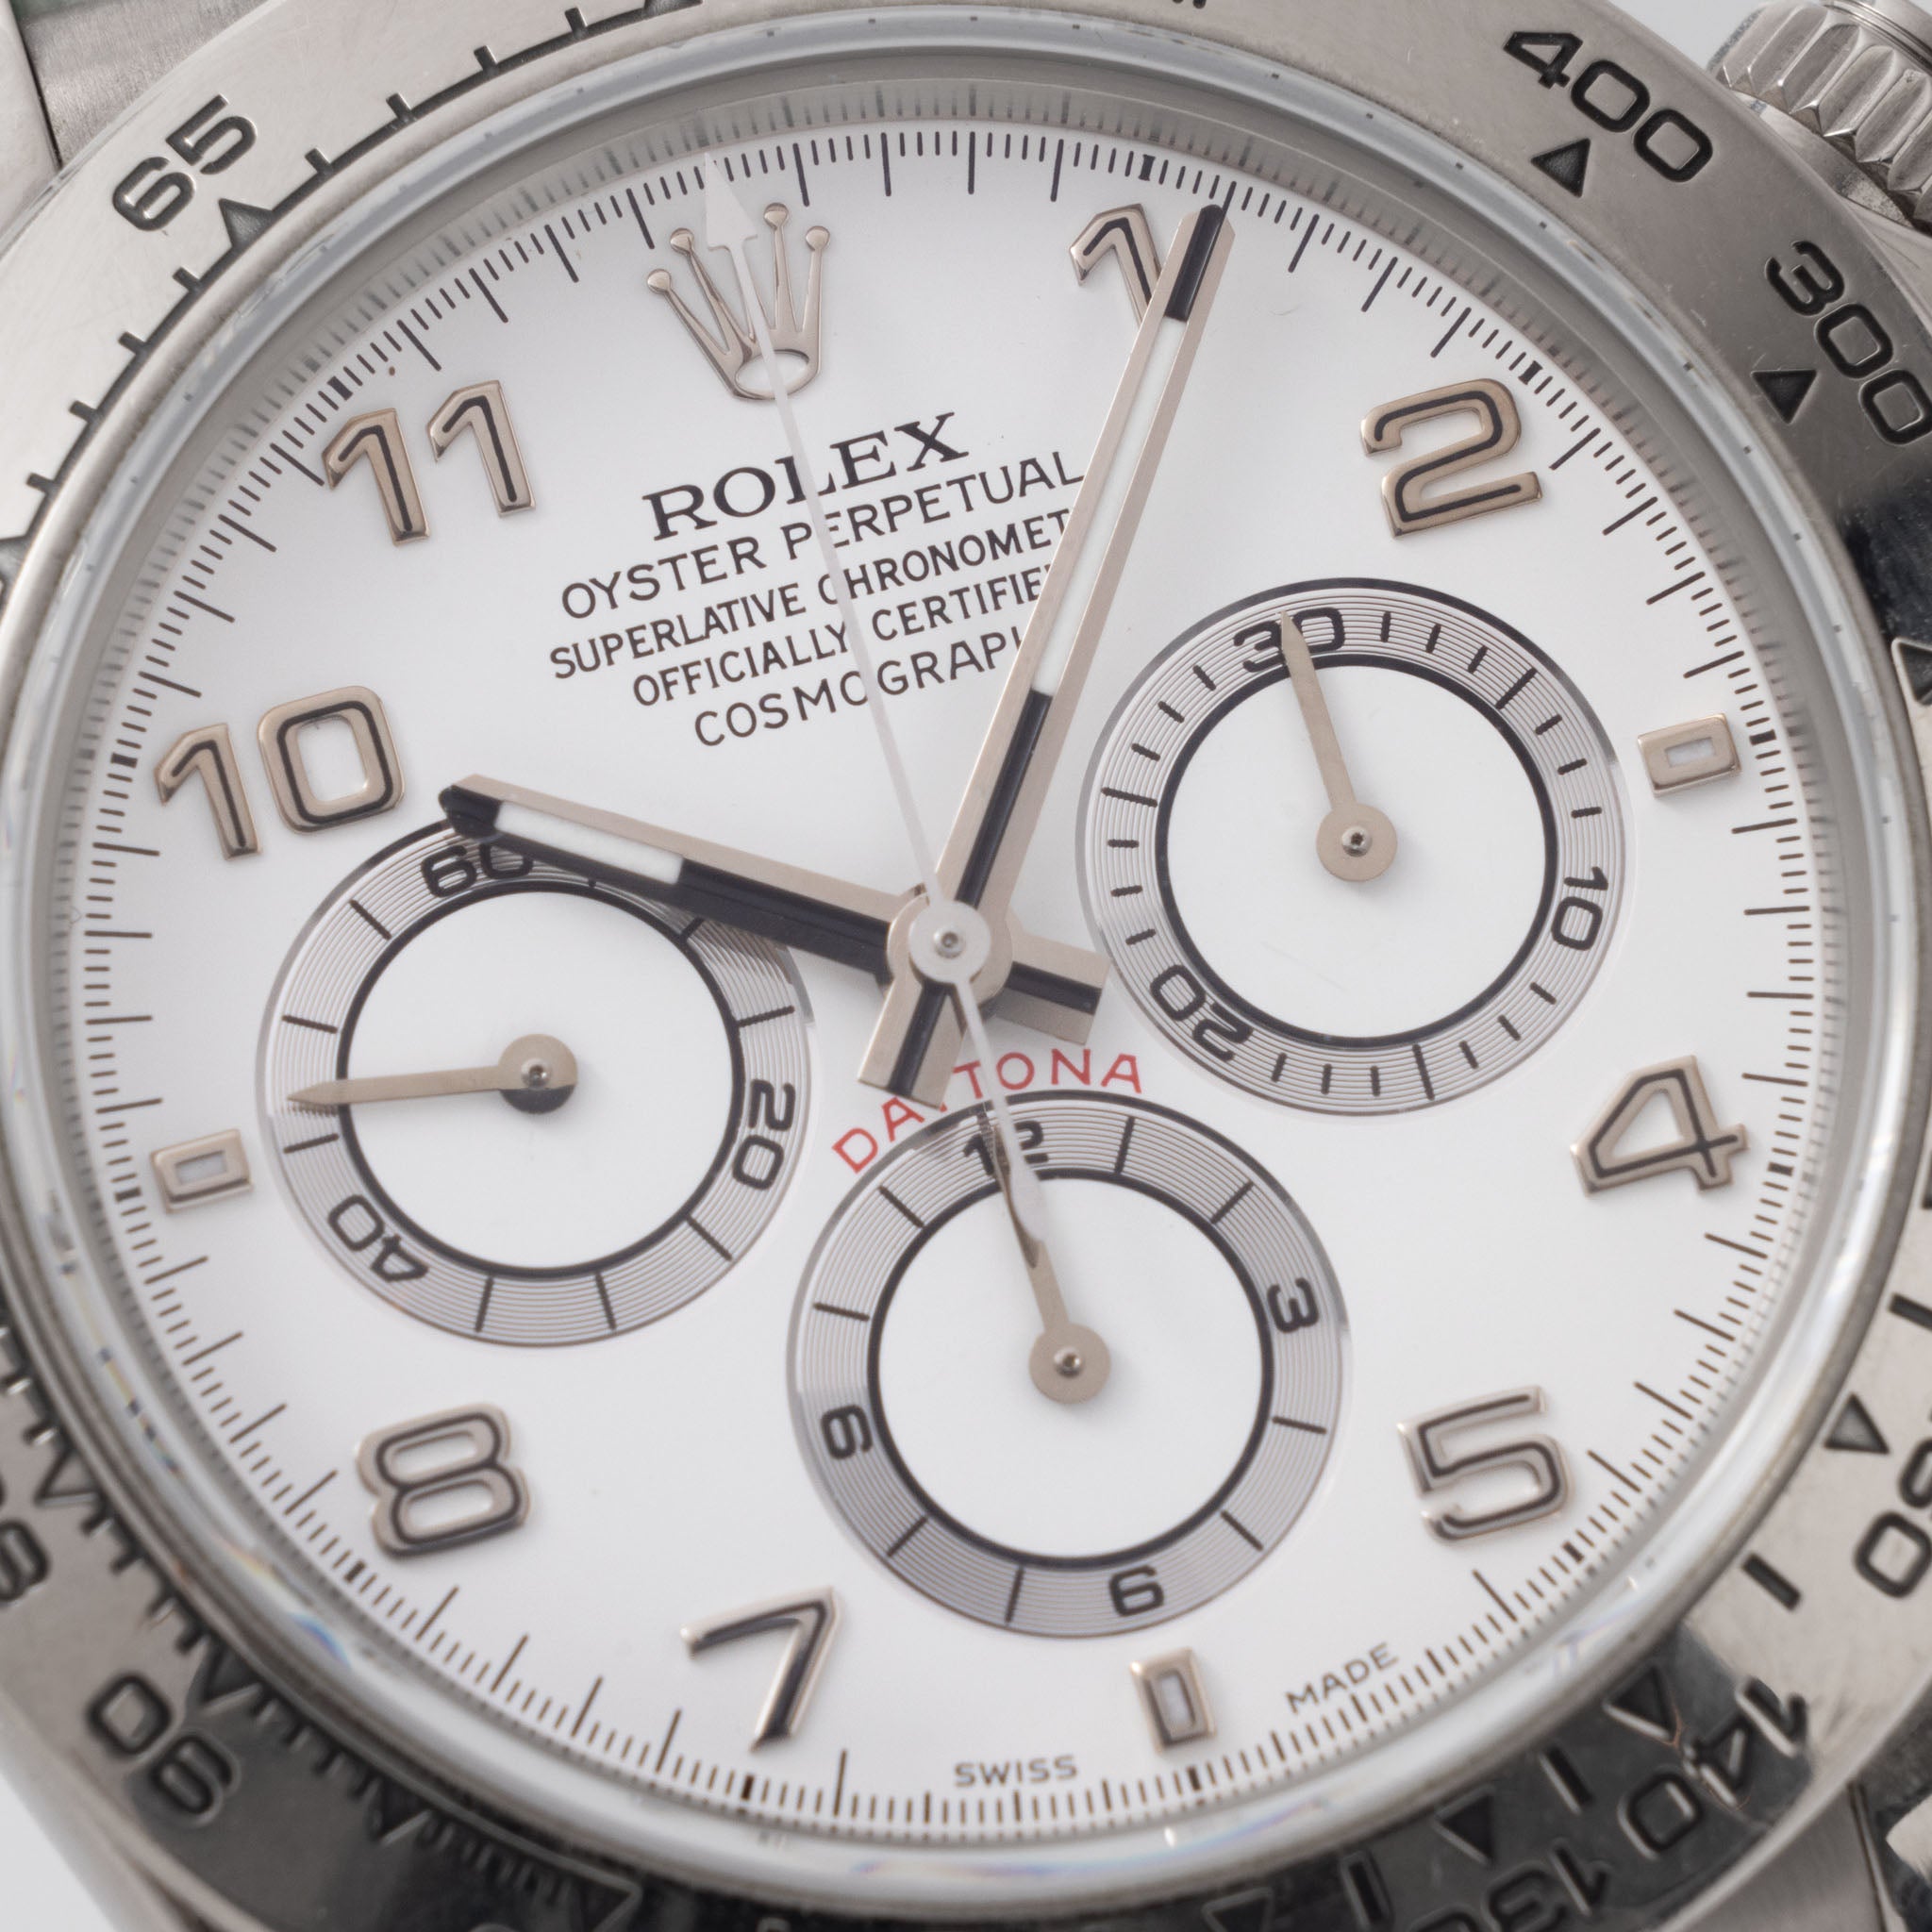 Rolex Daytona White Gold White Arabic Dial Box and Papers Ref 16519